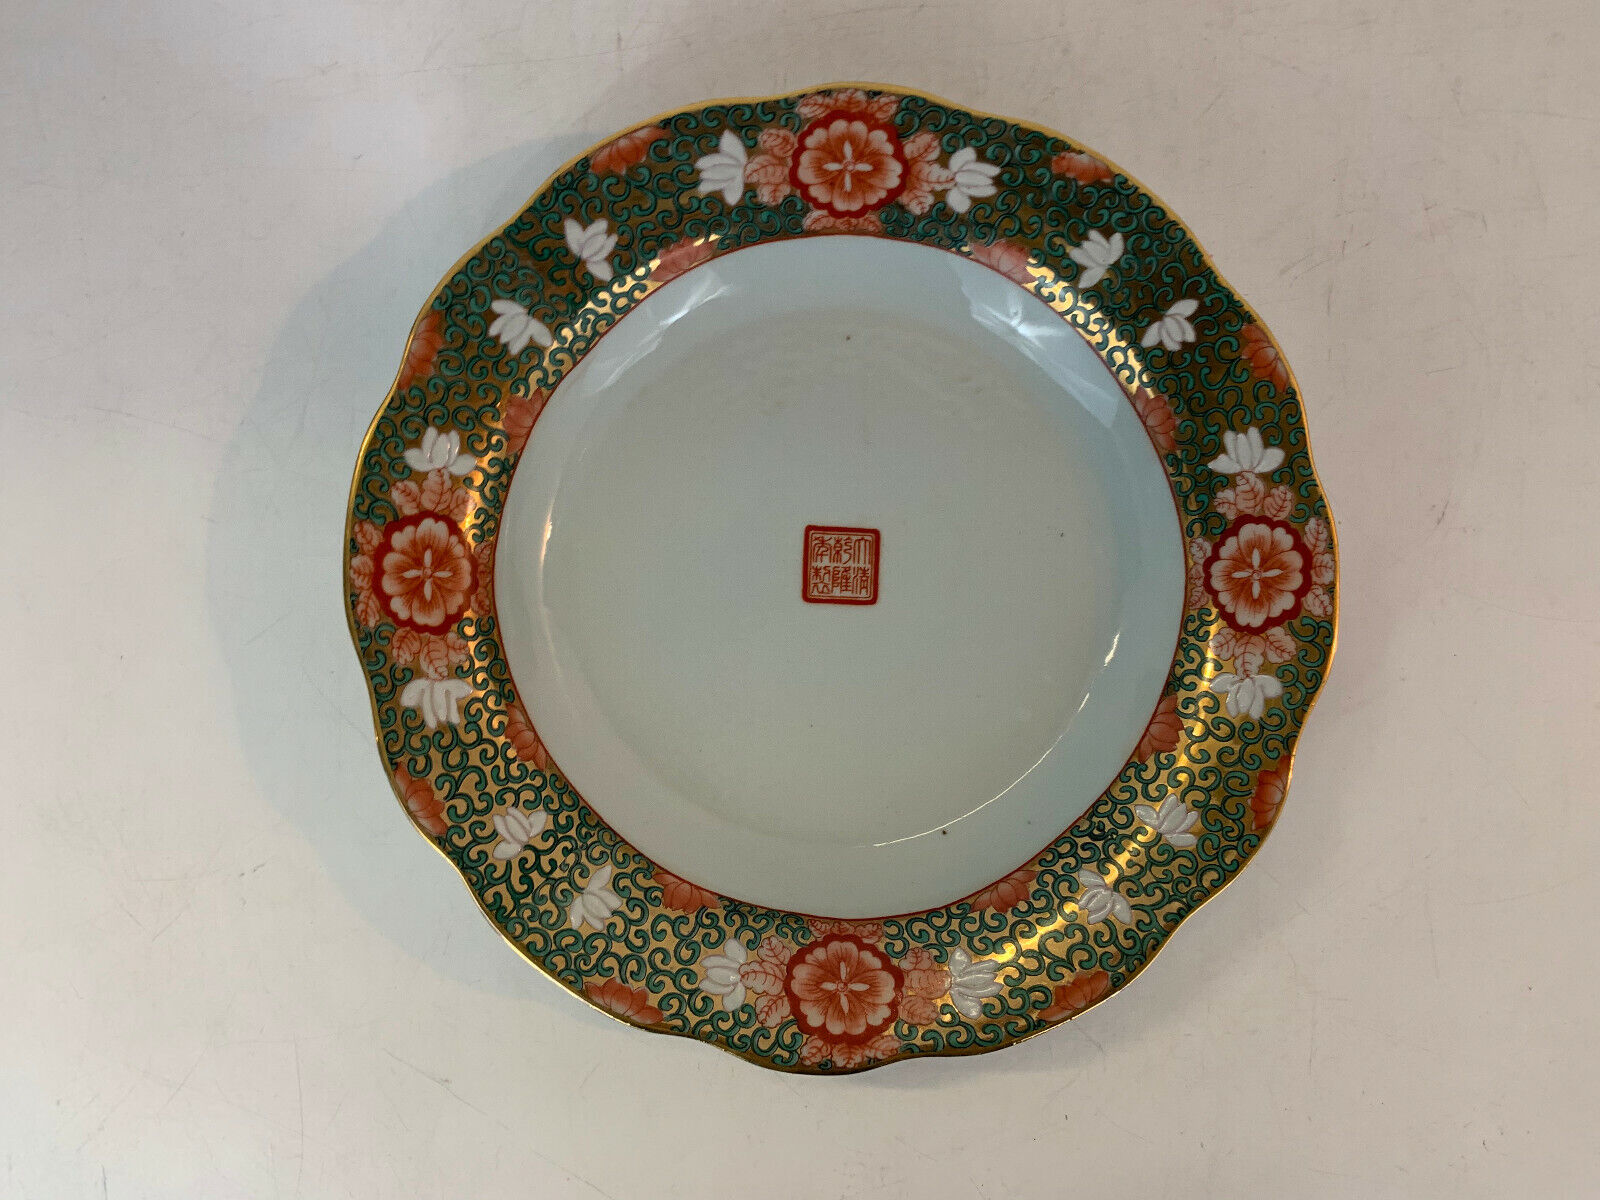 Chinese Unknown Age Porcelain Charger Plate w/ Qianlong Chop Seal Mark Floral